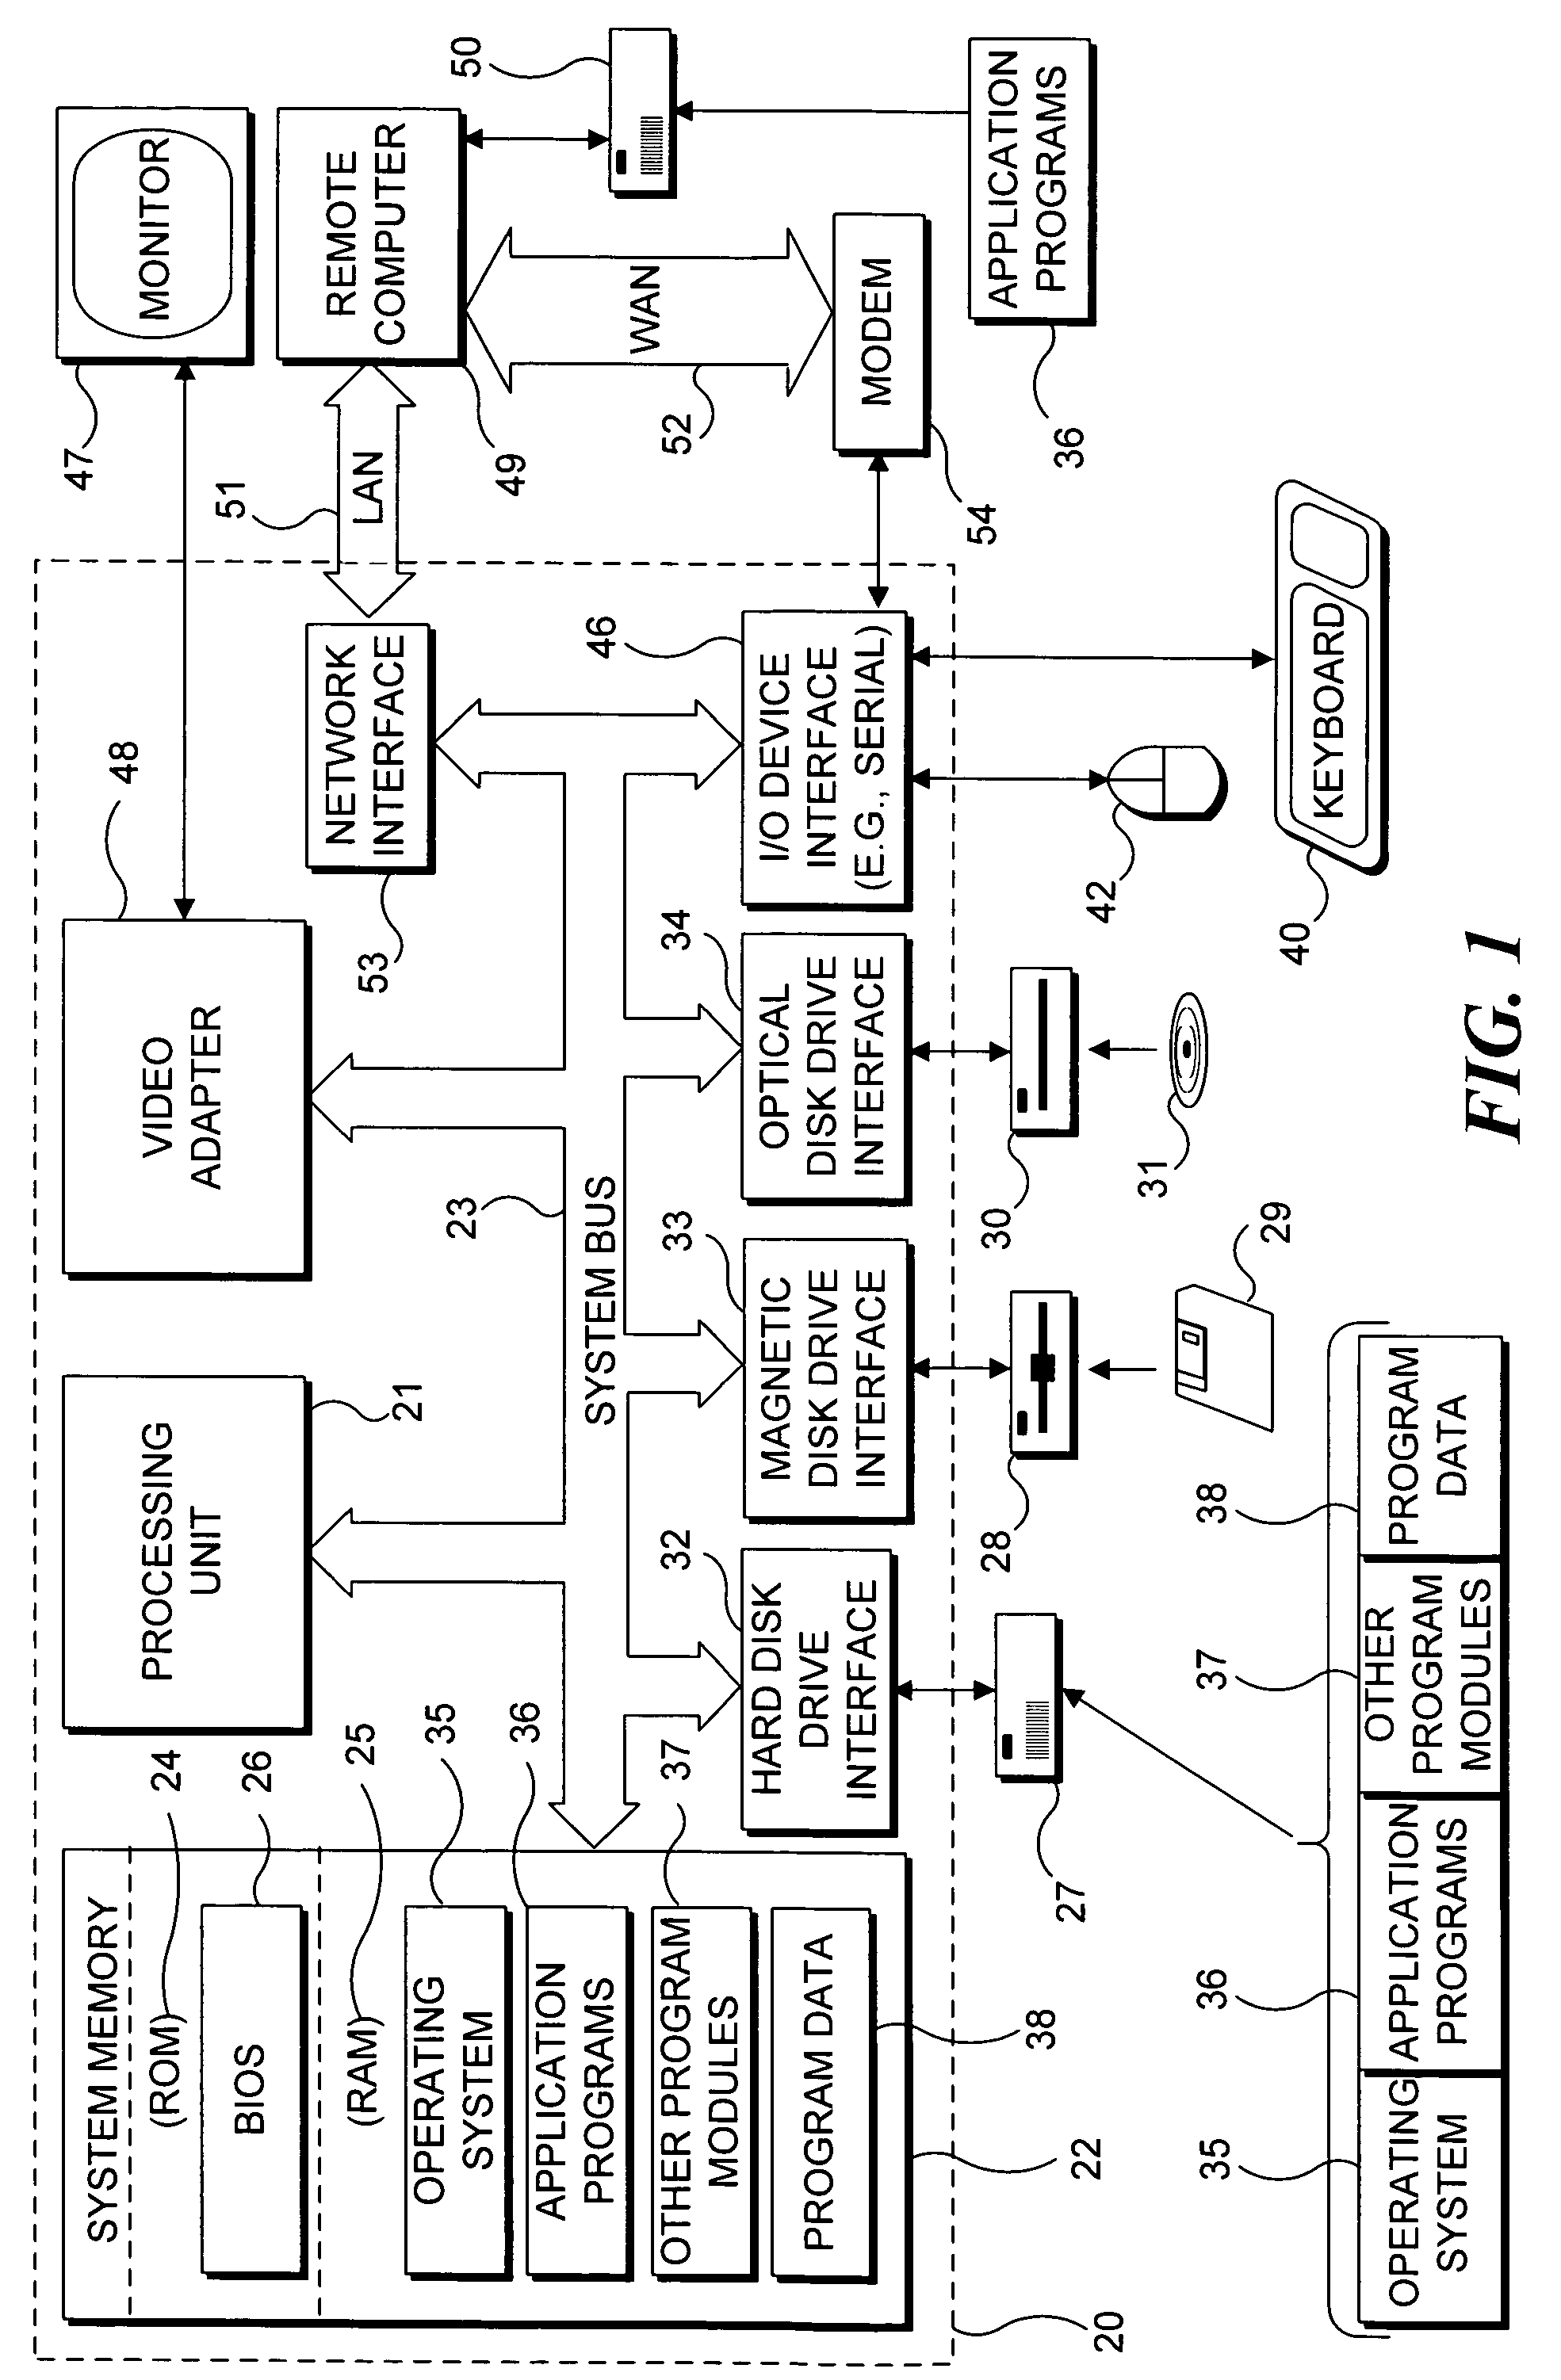 Using size and shape of a physical object to manipulate output in an interactive display application